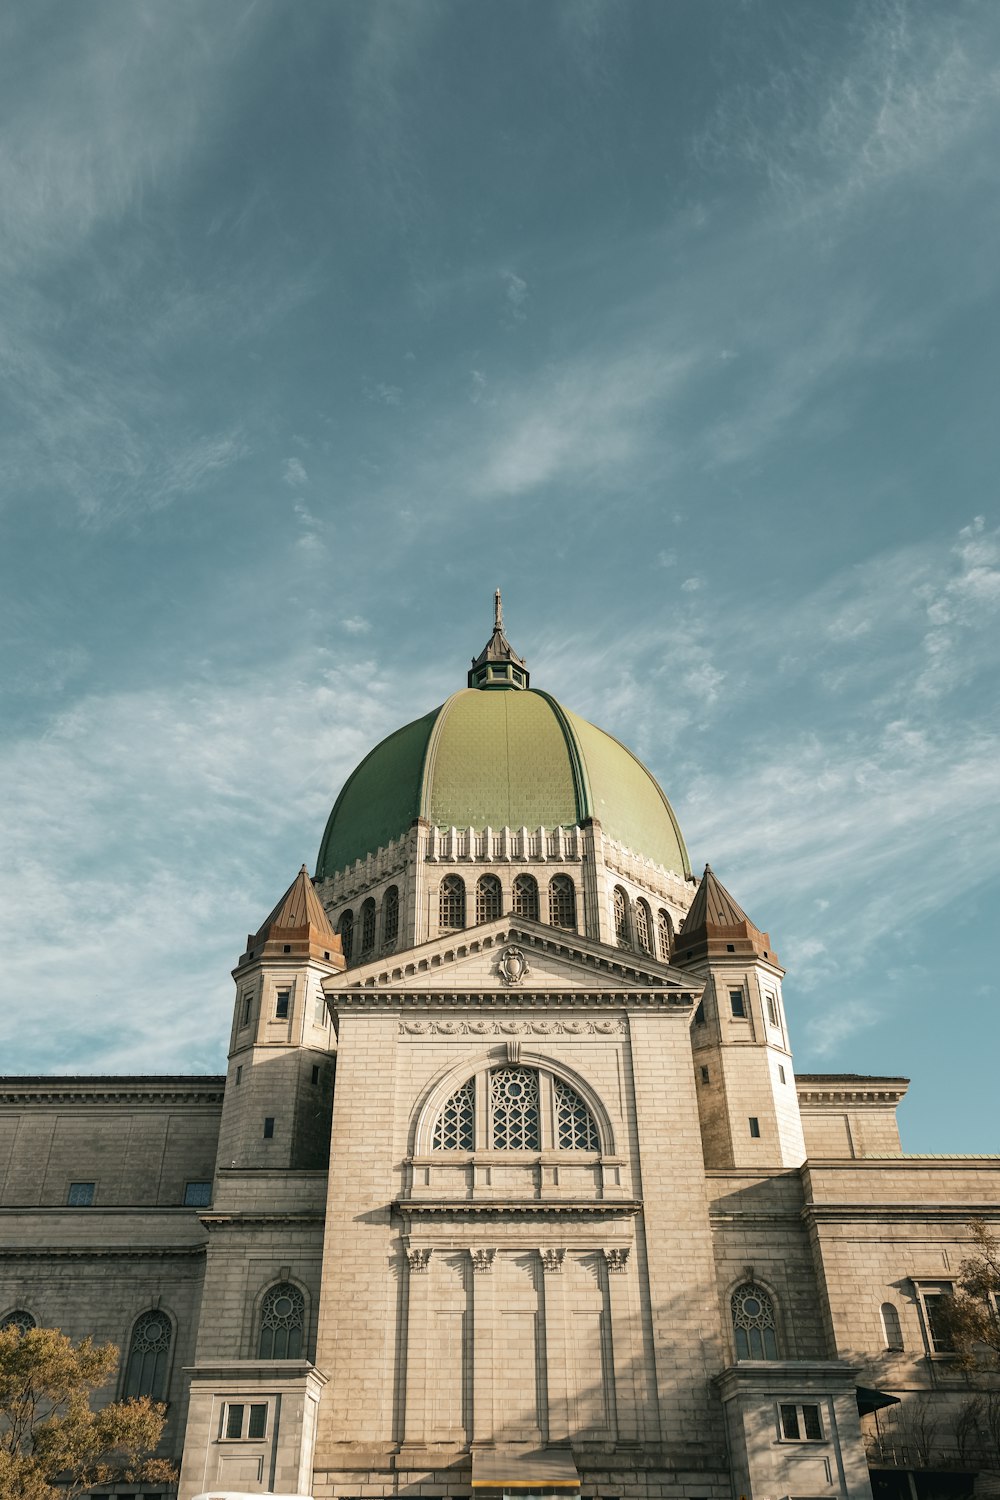 a large building with a green dome on top